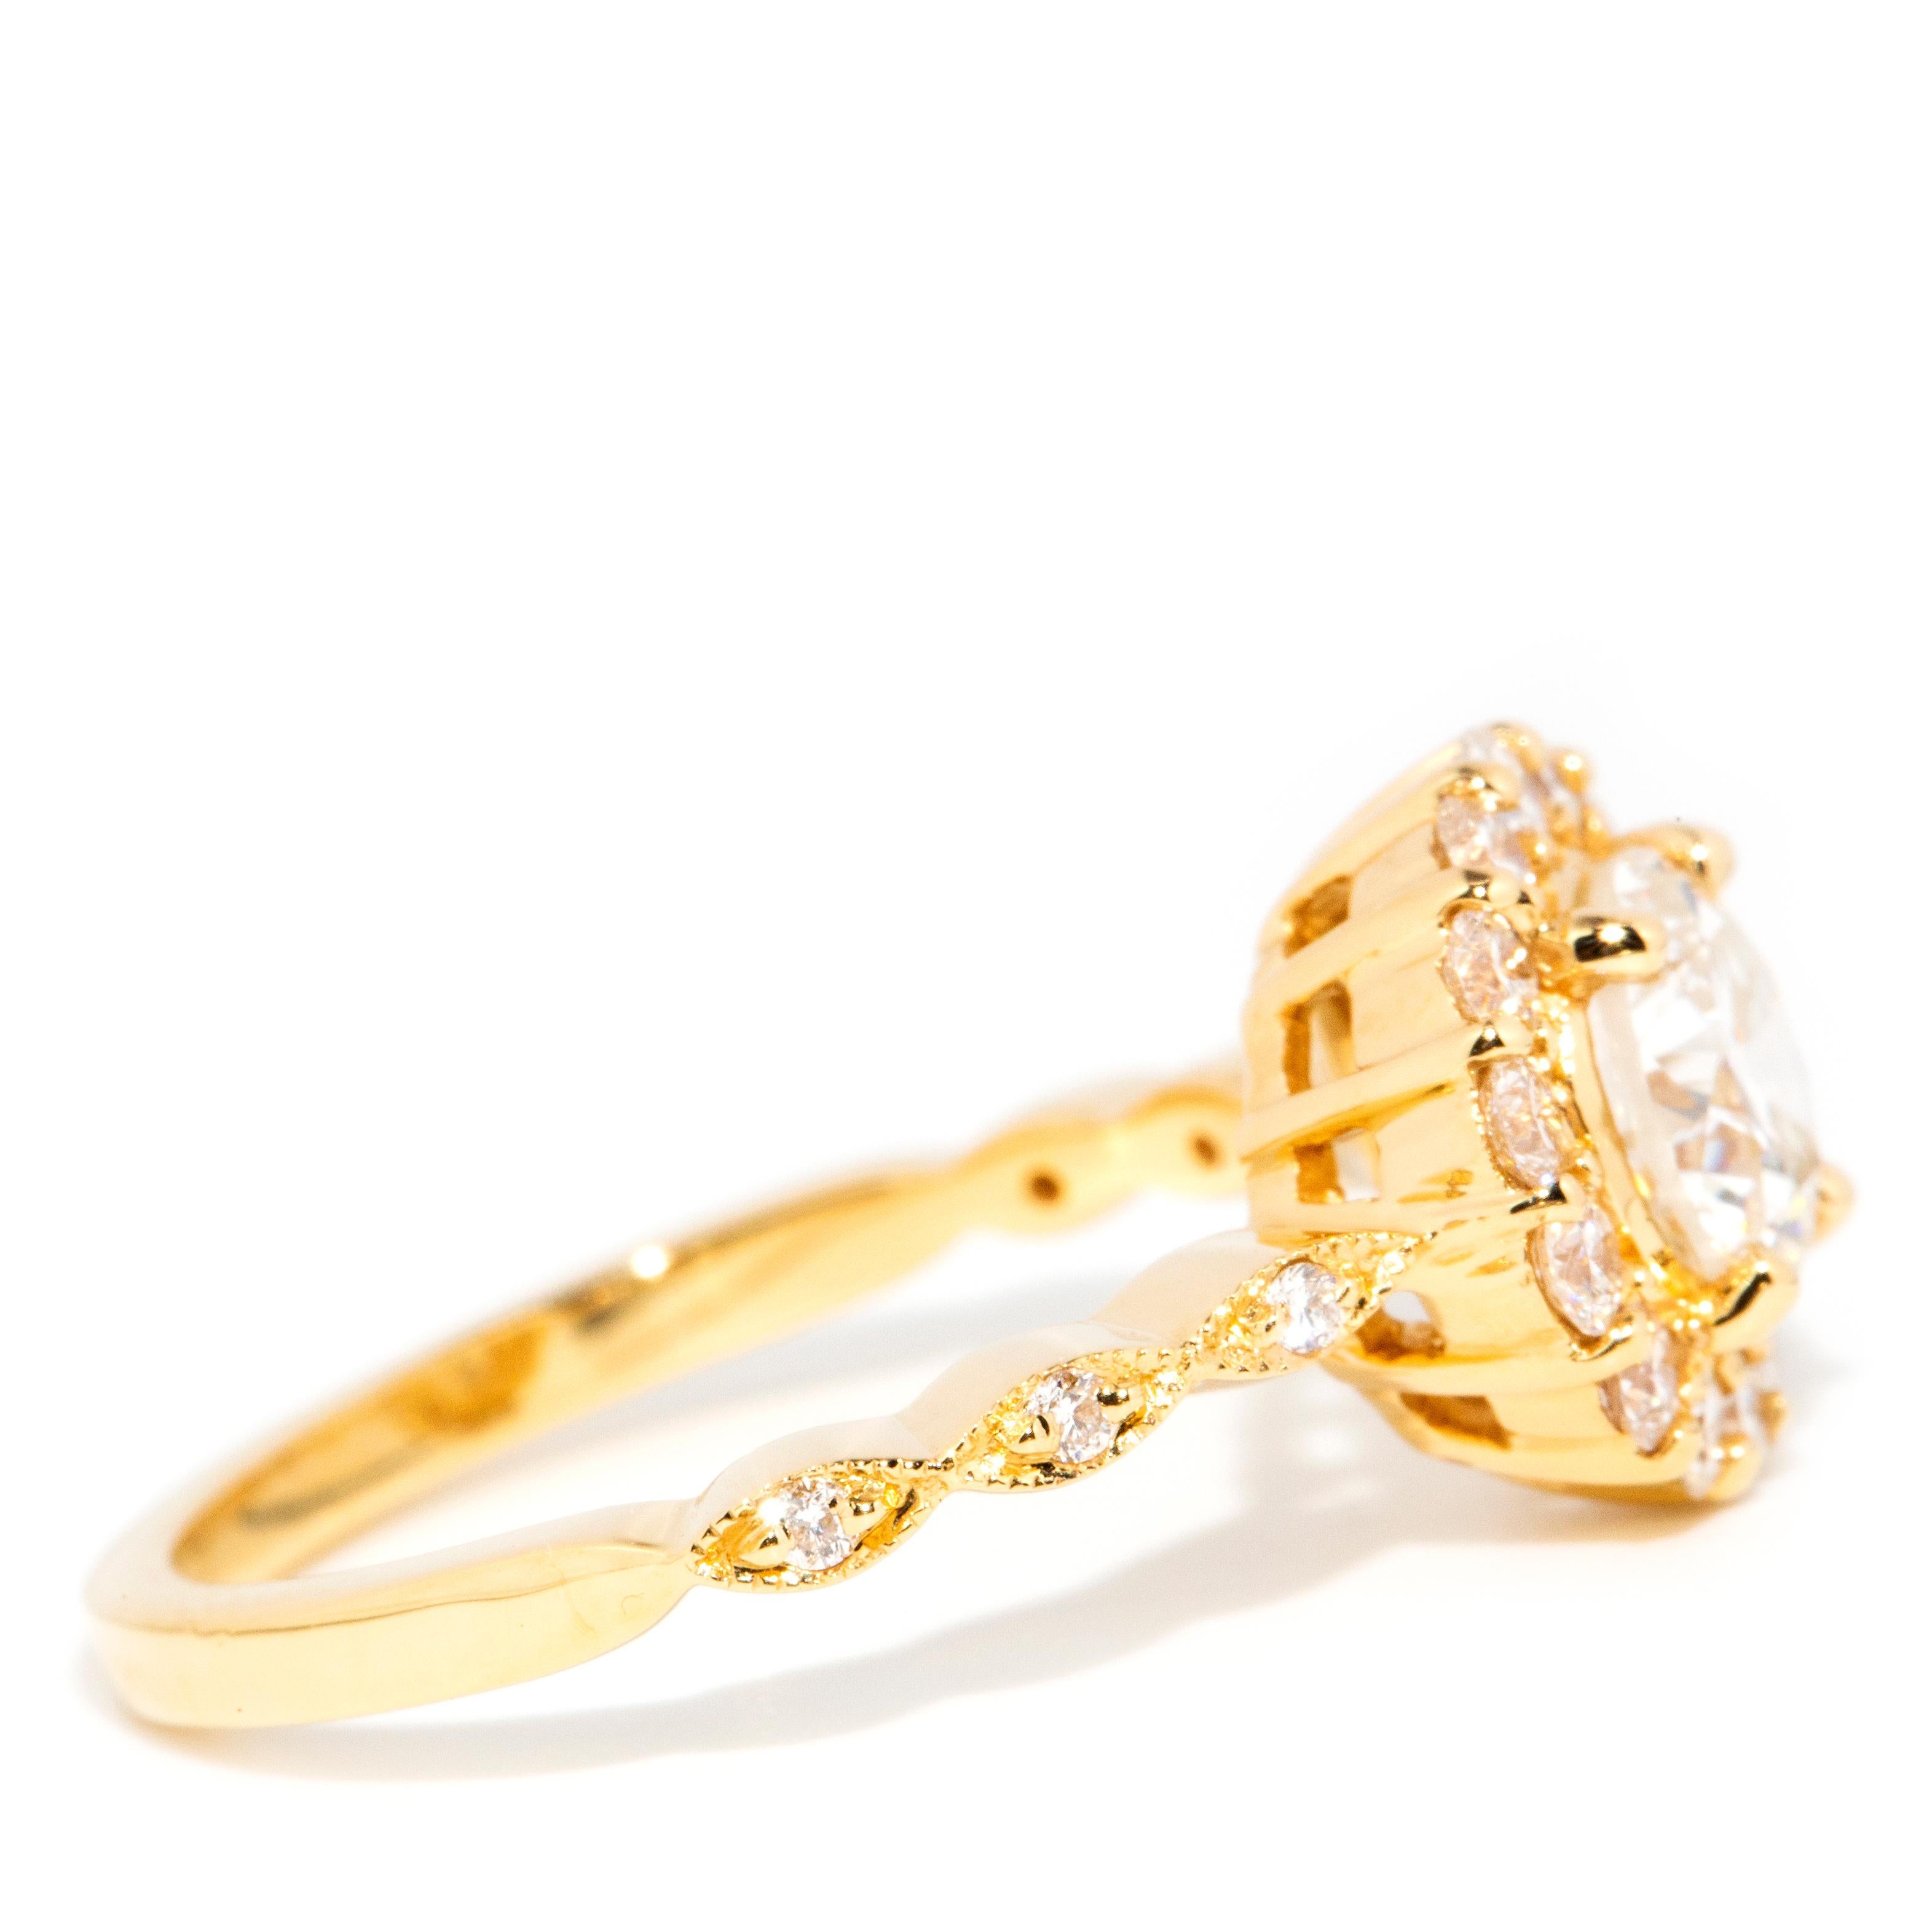 GIA Certified 1.01 Carat Diamond Halo Cluster Ring in 18 Carat Yellow Gold In New Condition For Sale In Hamilton, AU